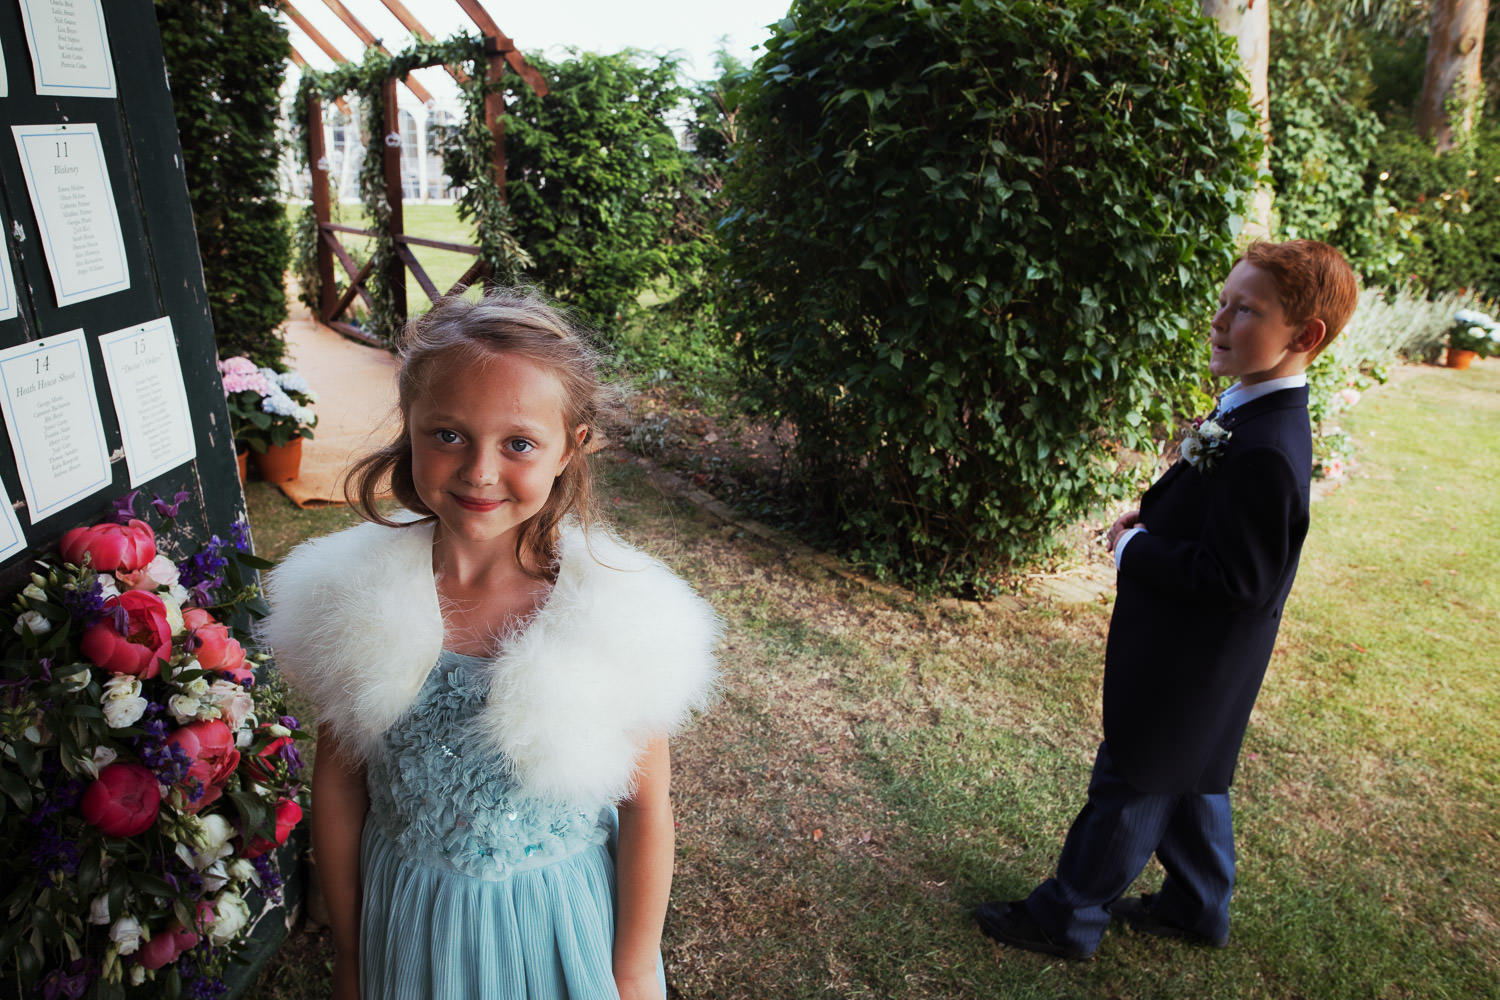 A young girl in a dress at a wedding looks at the camera.